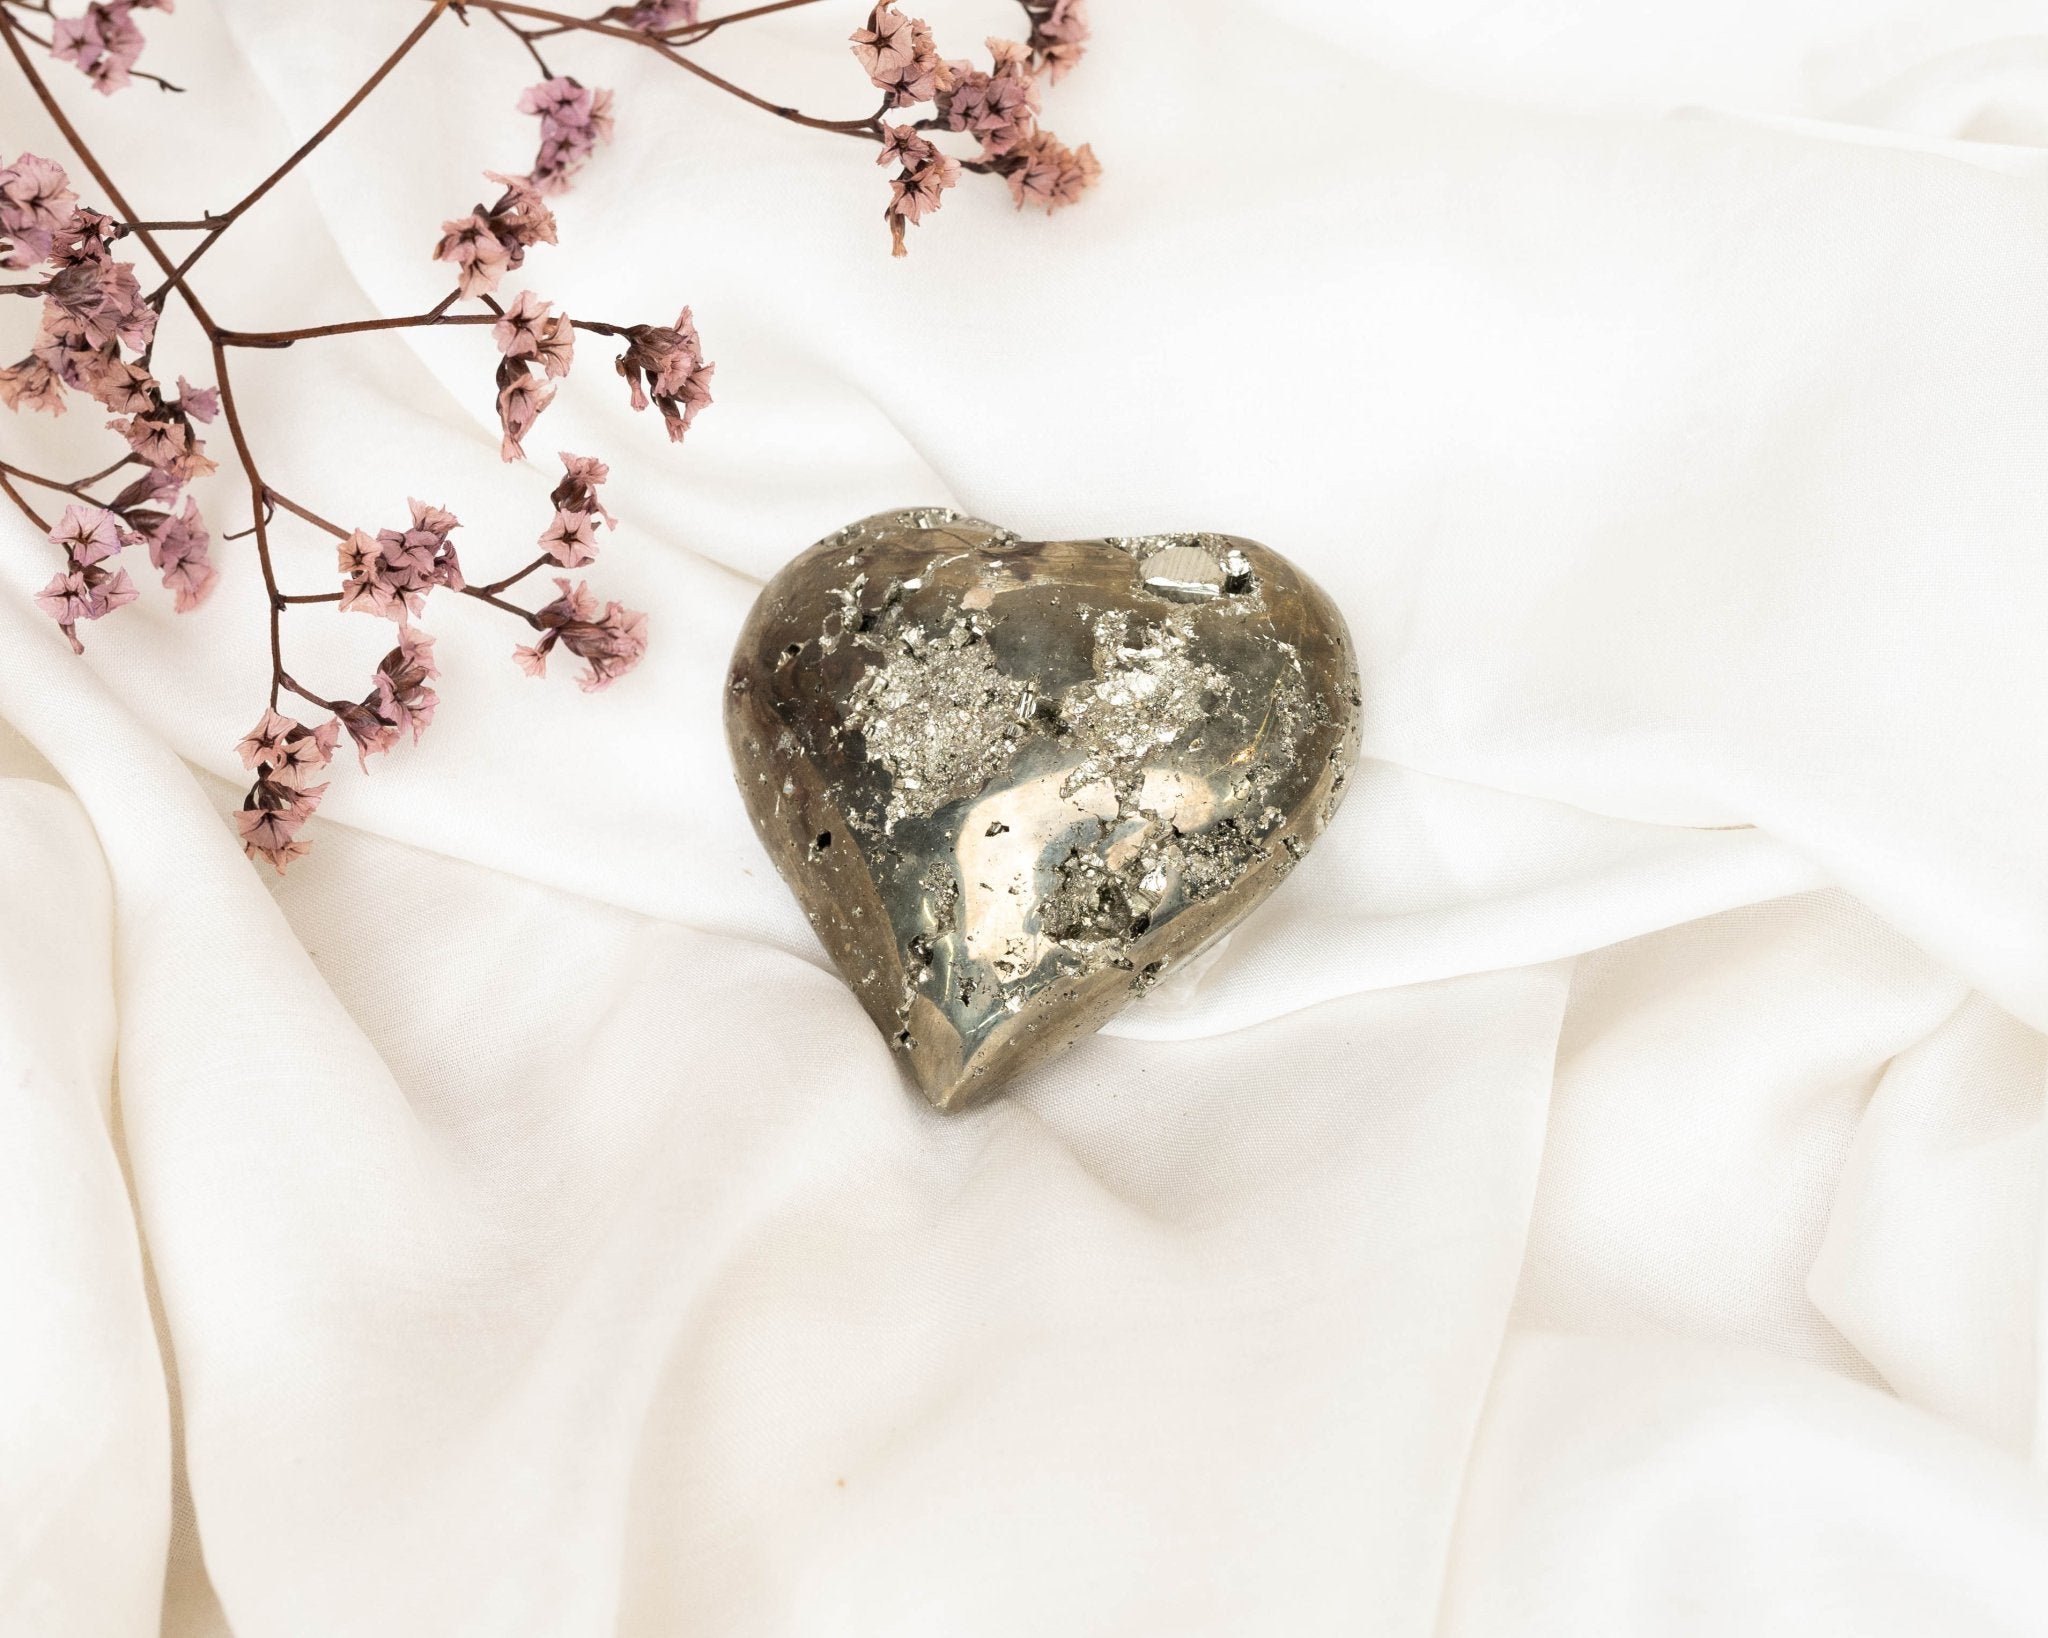 Iron Pyrite Heart 201.8g - Bodh Gem and Crystals